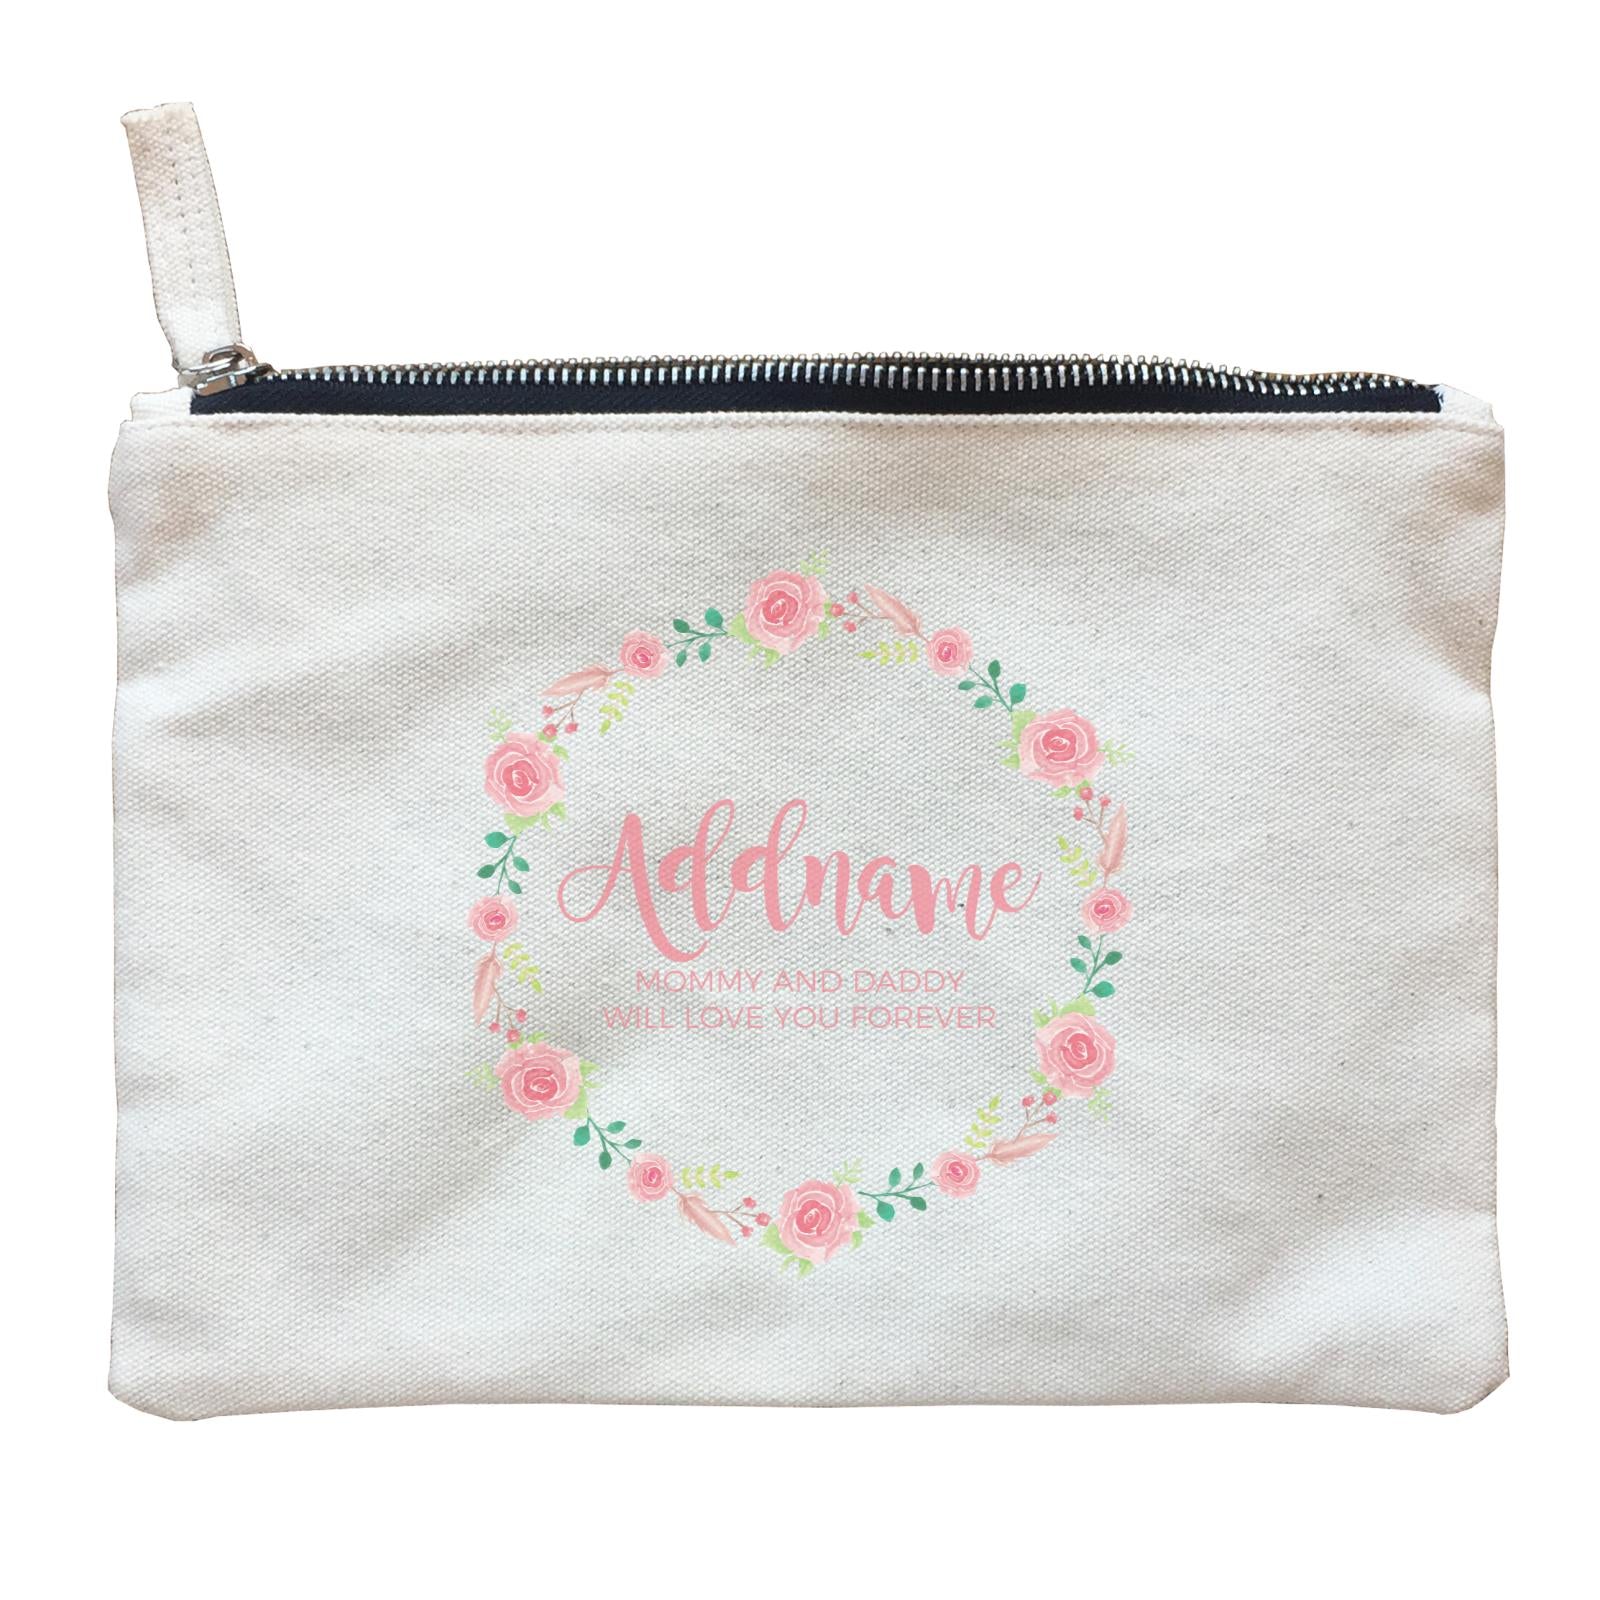 Pink Roses Wreath Personalizable with Name and Text Zipper Pouch